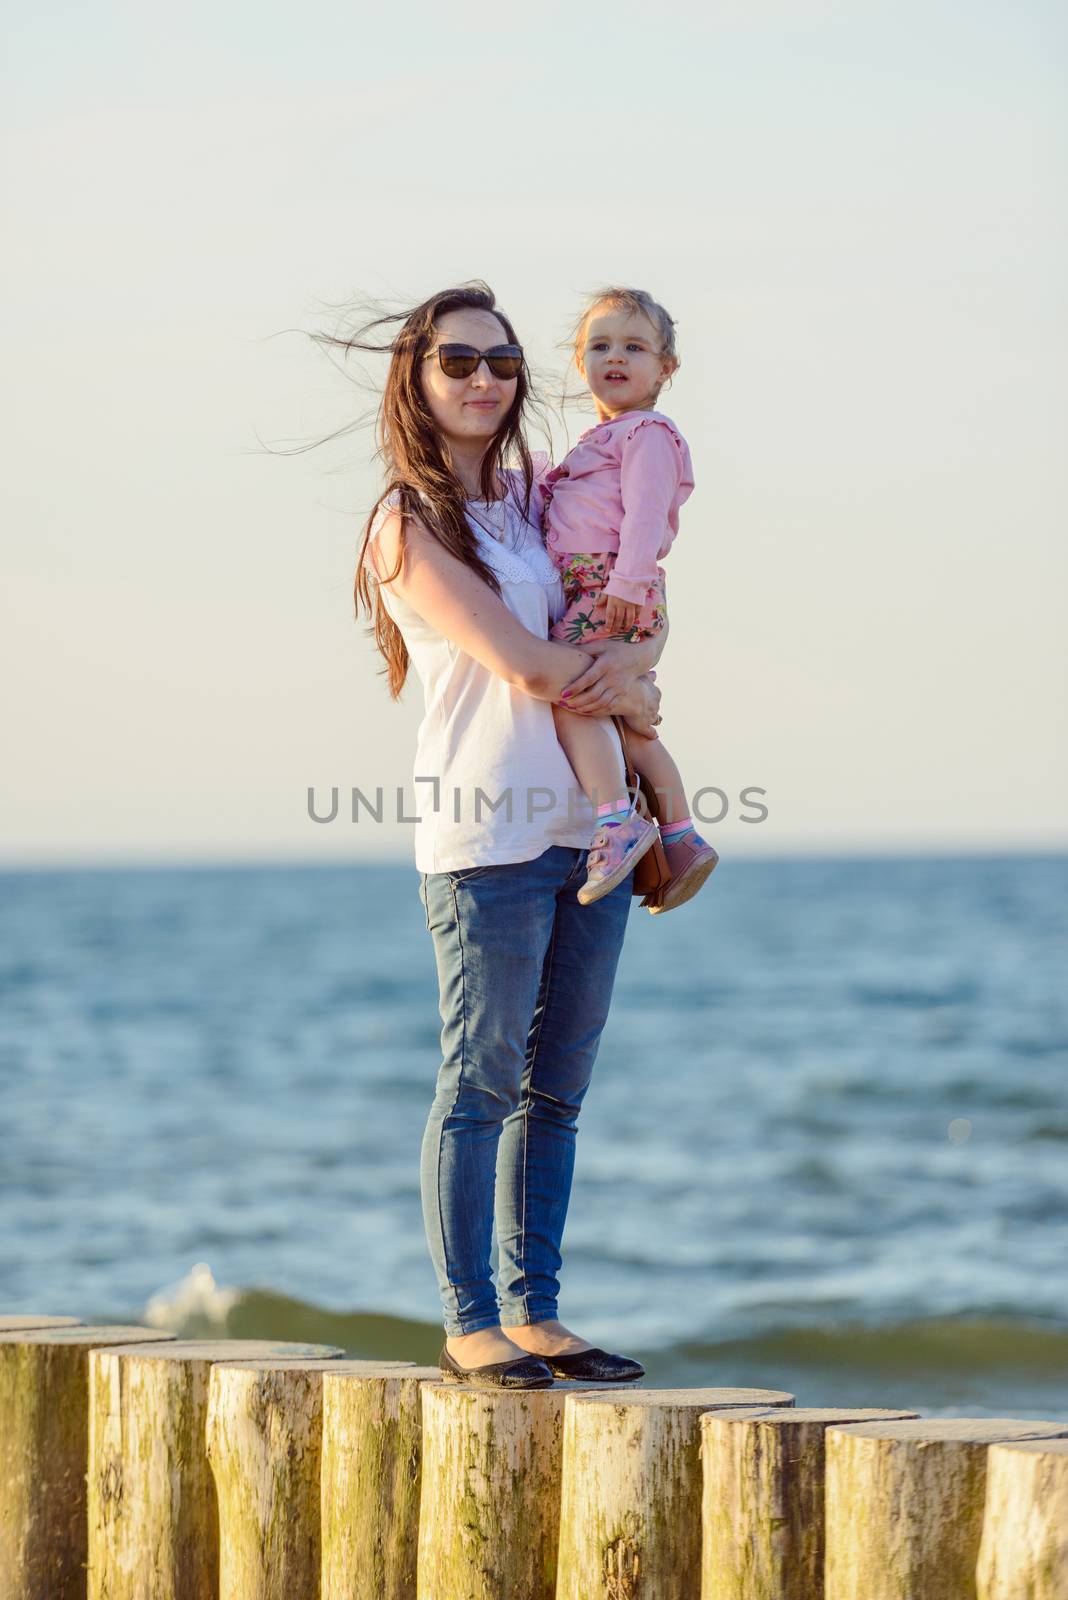 Mother and little daughter having fun on the beach. Authentic lifestyle image.